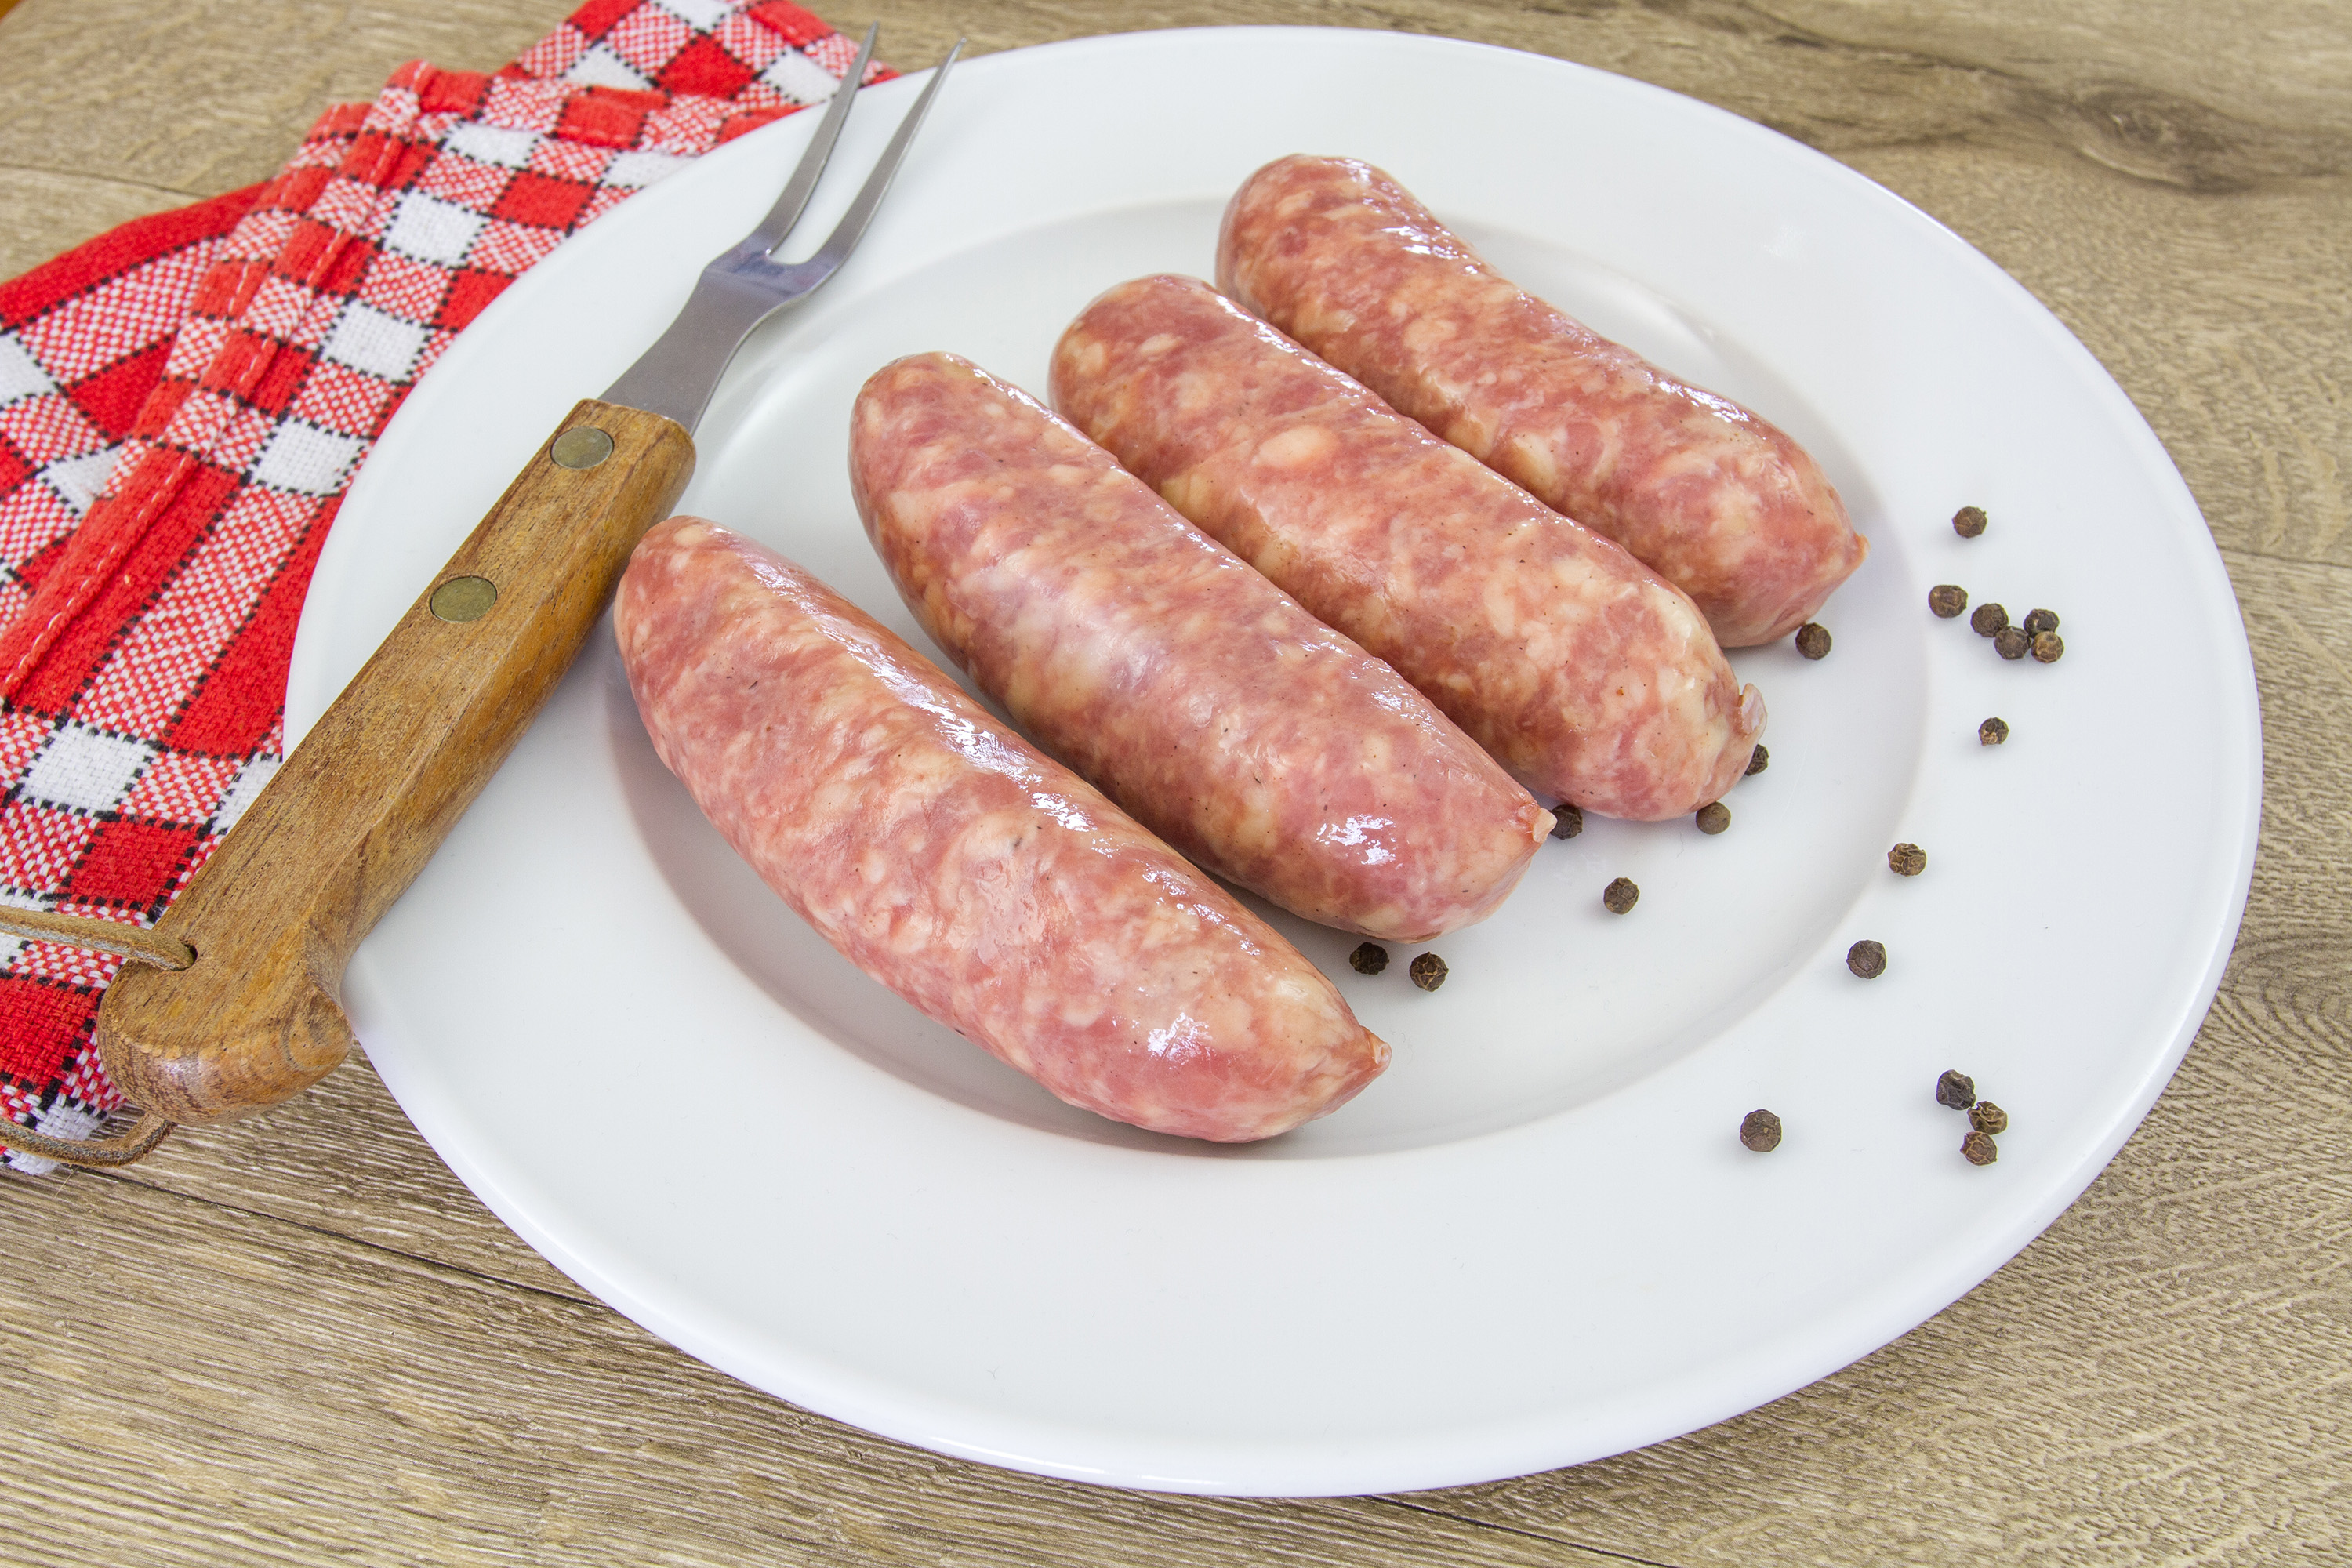 Diot | Traditional Sausage From Savoie, France